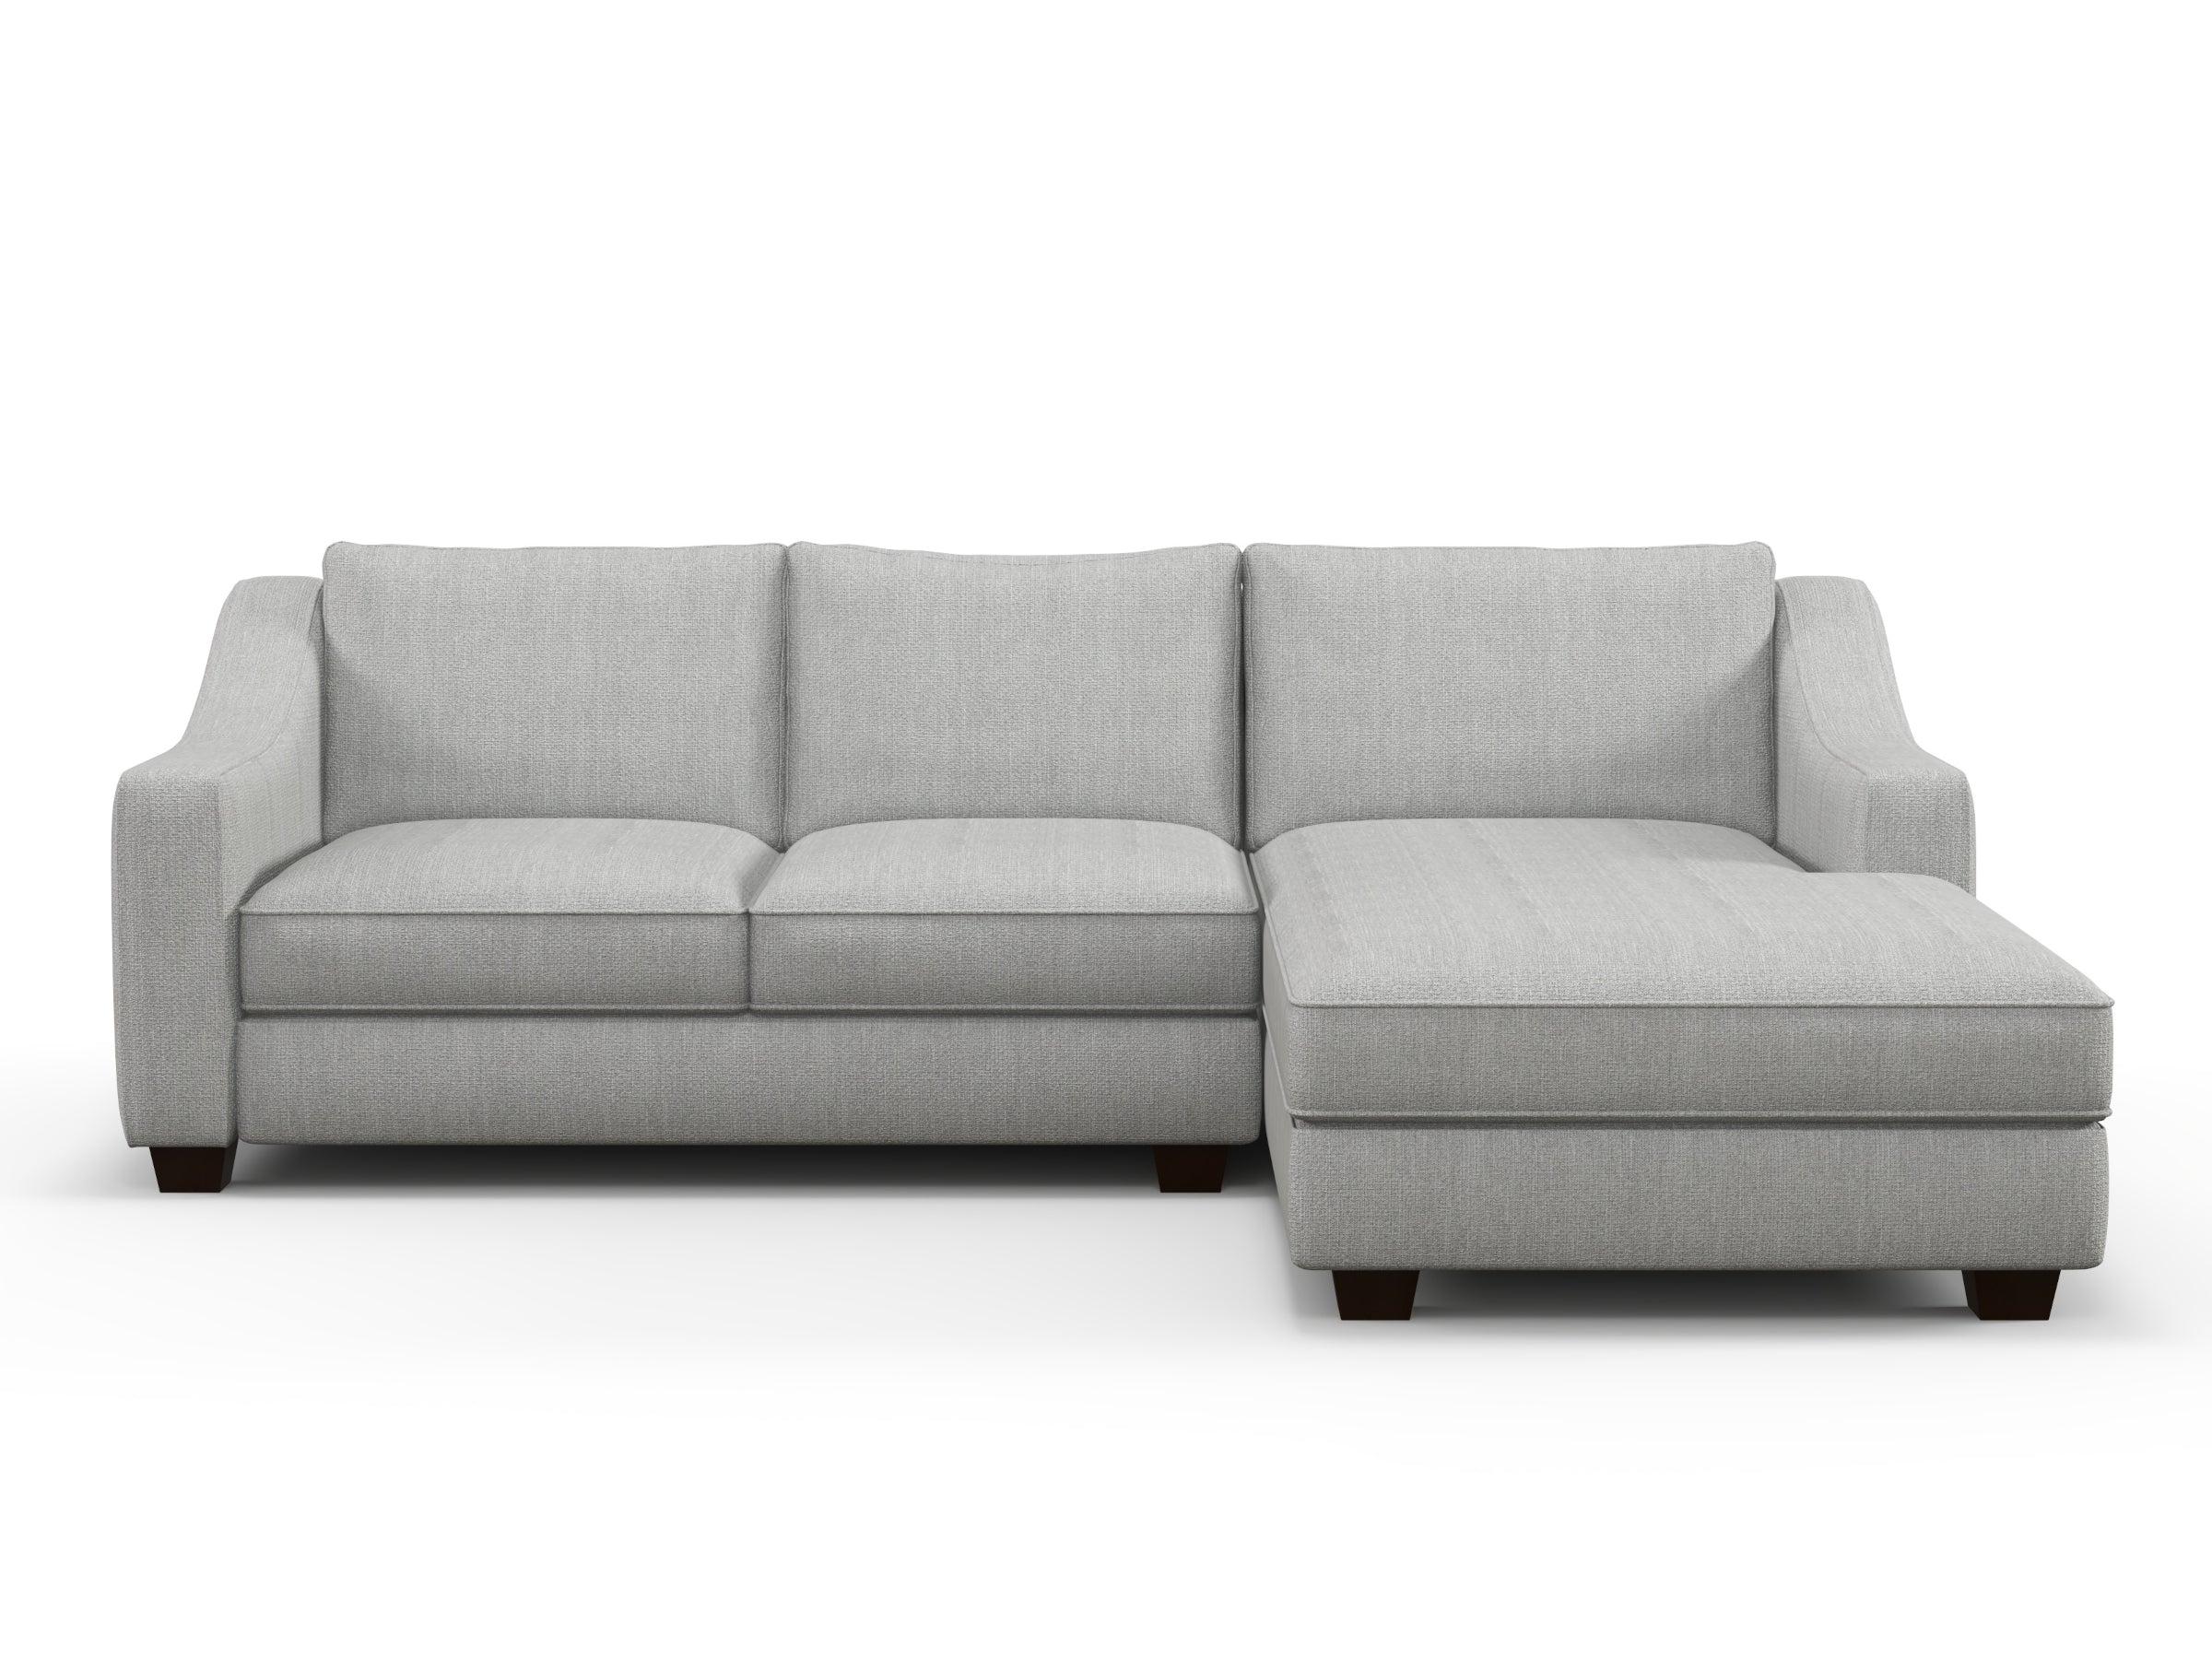 Merced Modern Slope Couch With Chaise Fully Customizable Grey